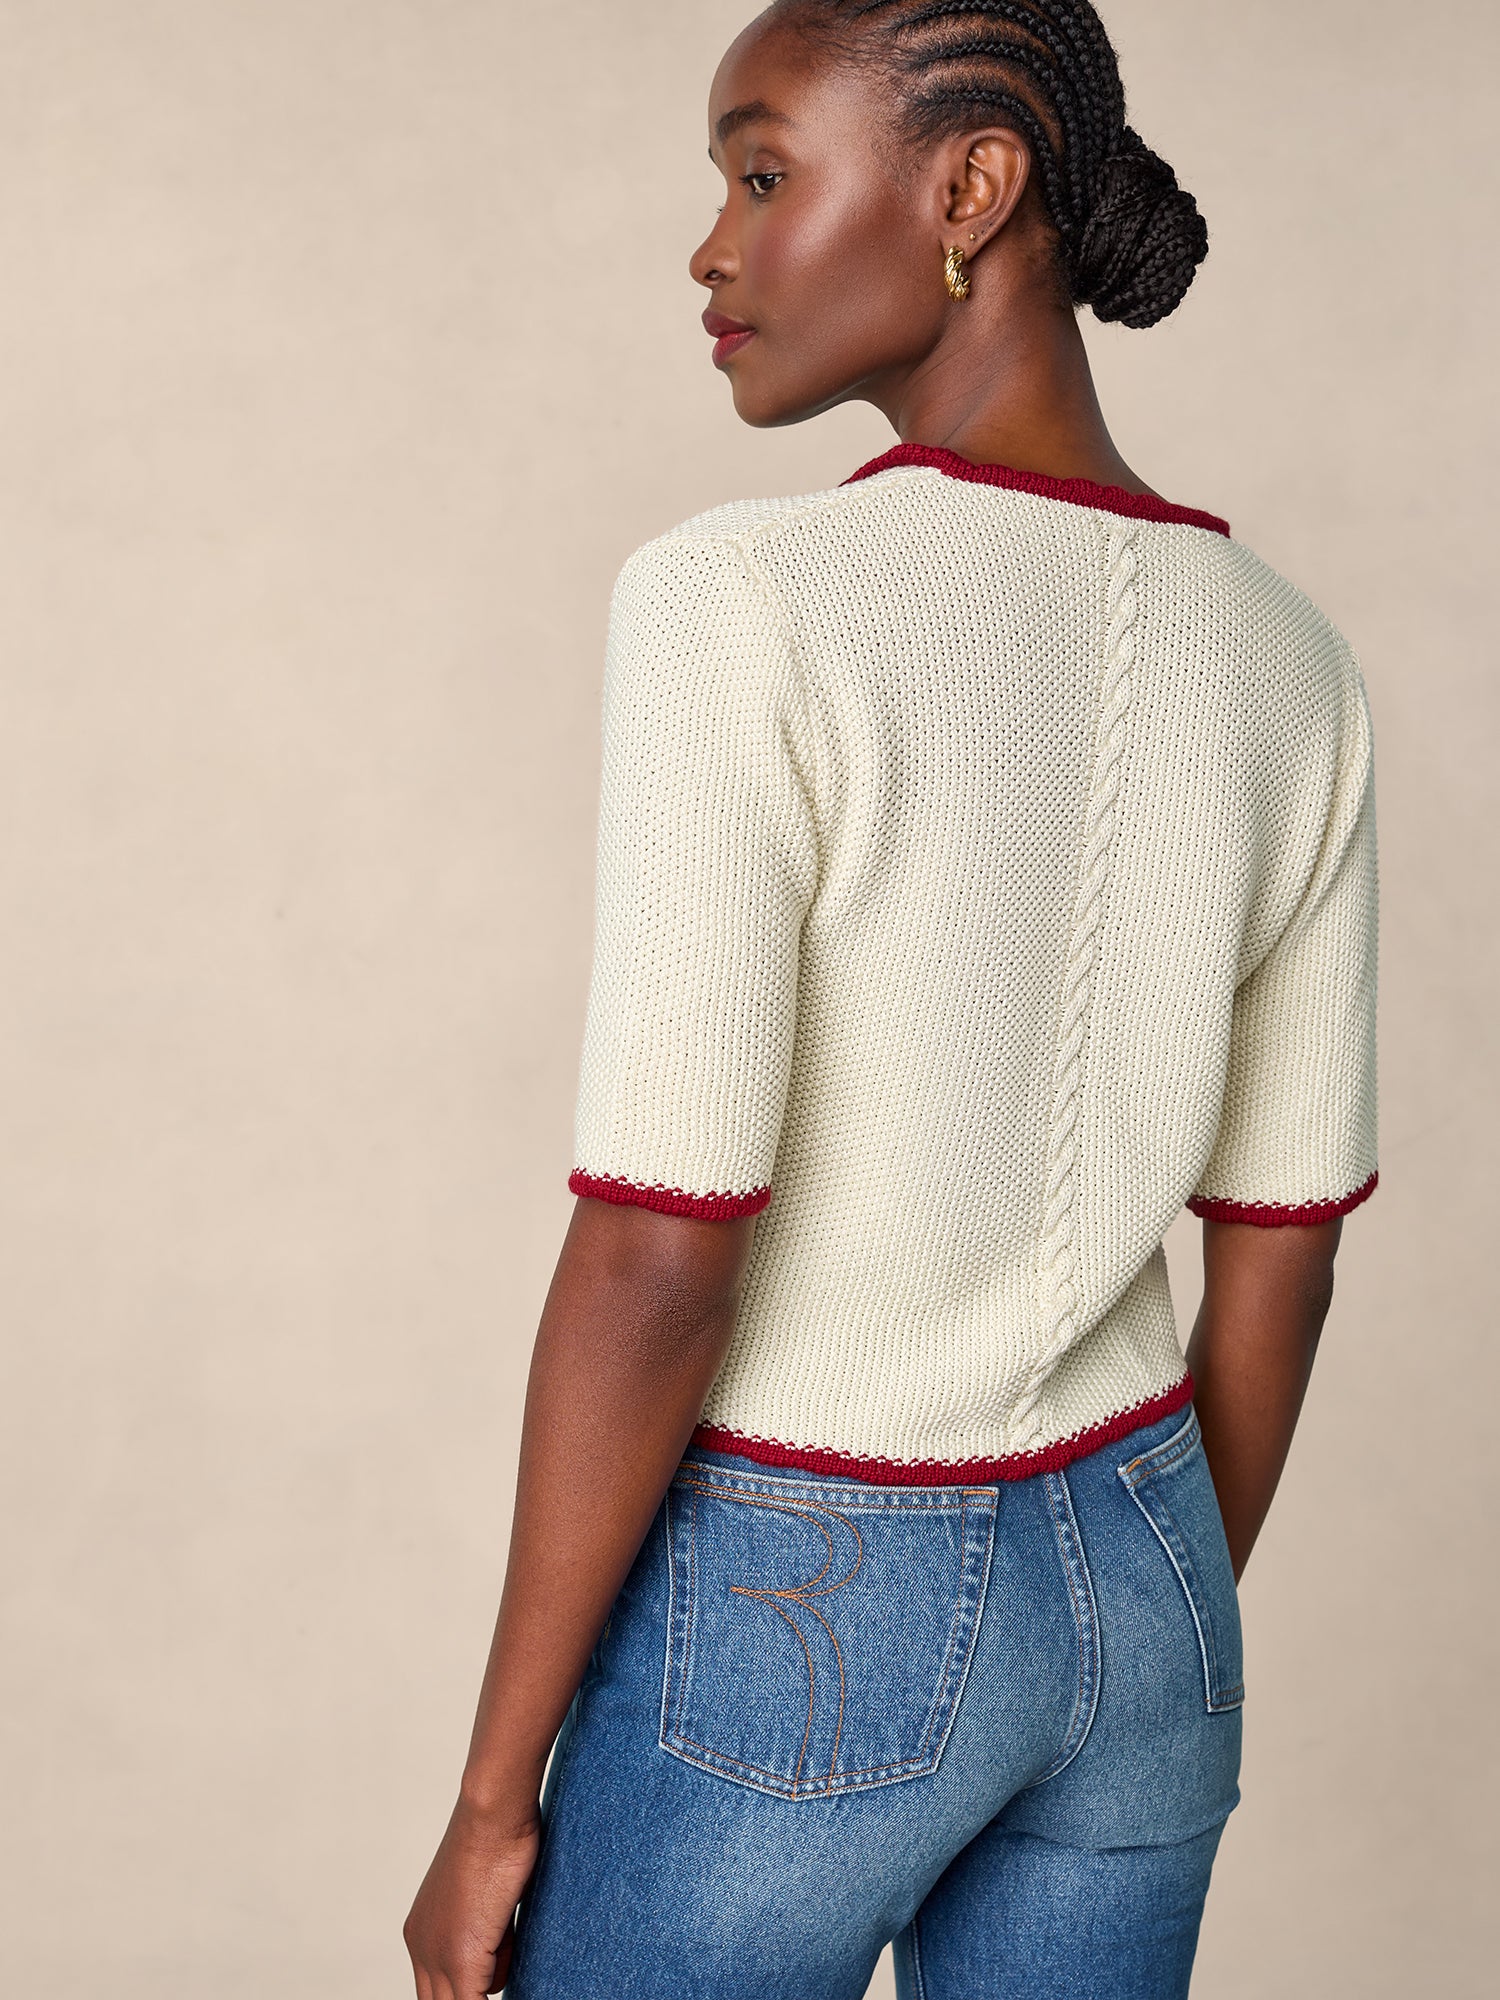 Embroidered cotton cardigan | Rouje • Rouje Paris